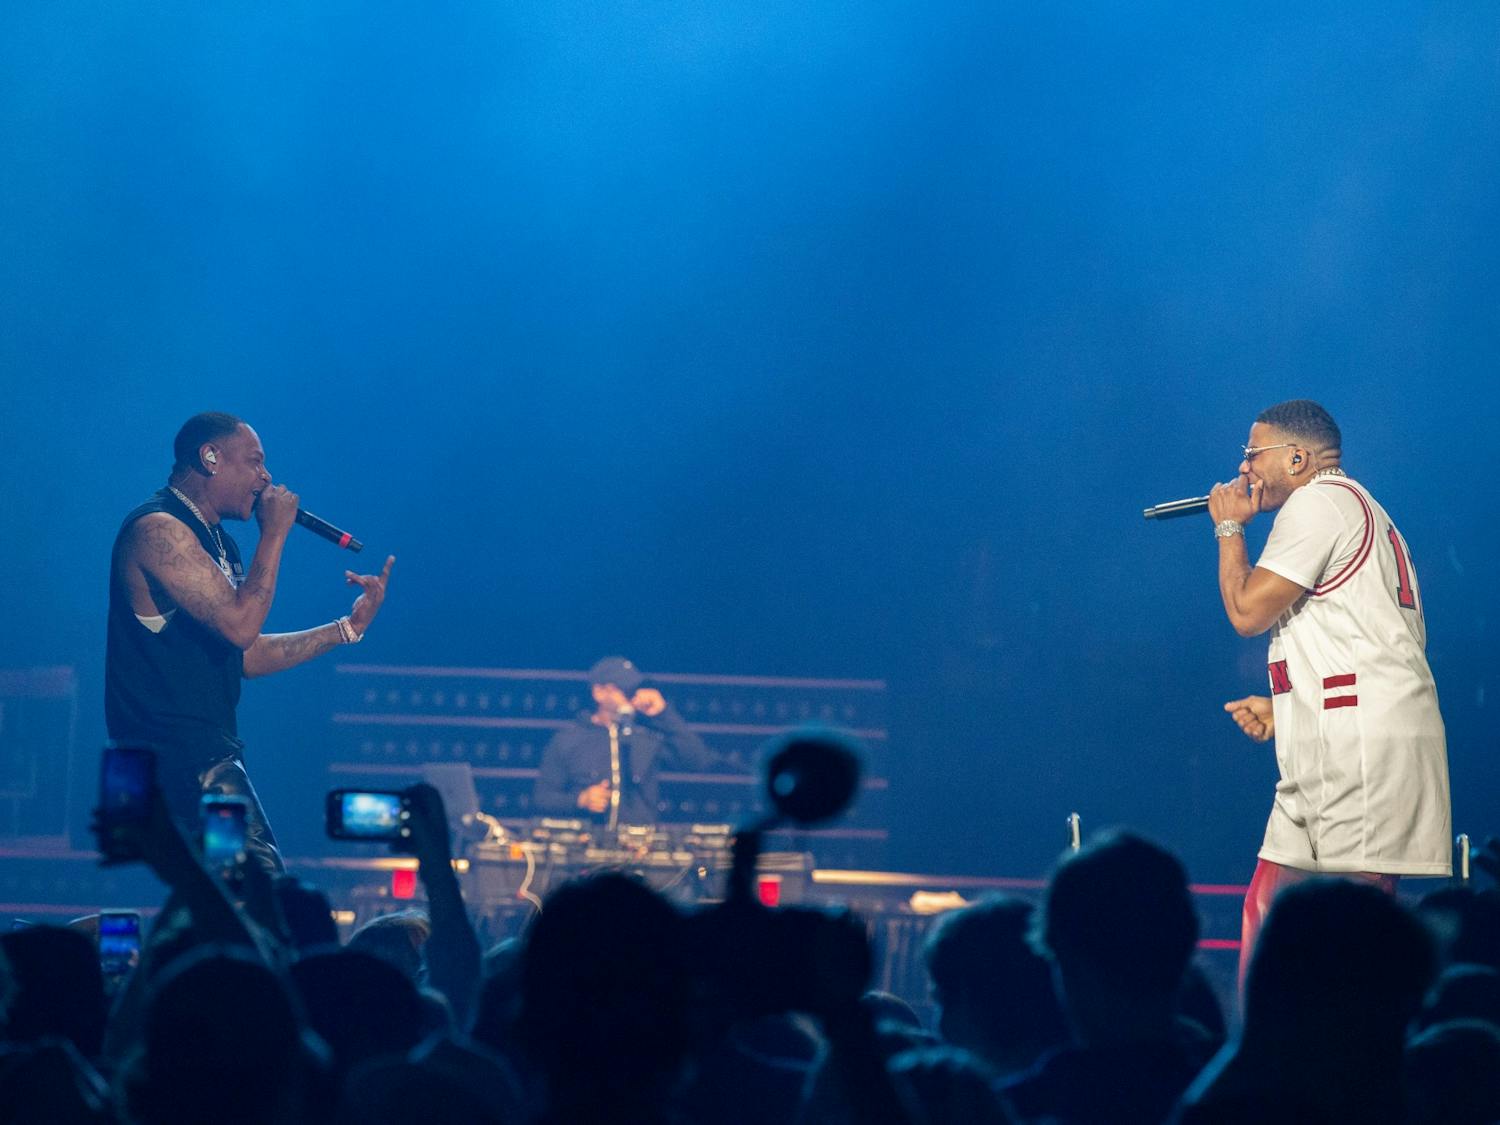 Nelly raps with his little brother, Lavell “City Spud” Webb on stage during the opening act of the Darius Rucker concert at Colonial Life Arena on April 24, 2022. The concert was held as a celebration for the women's basketball team.